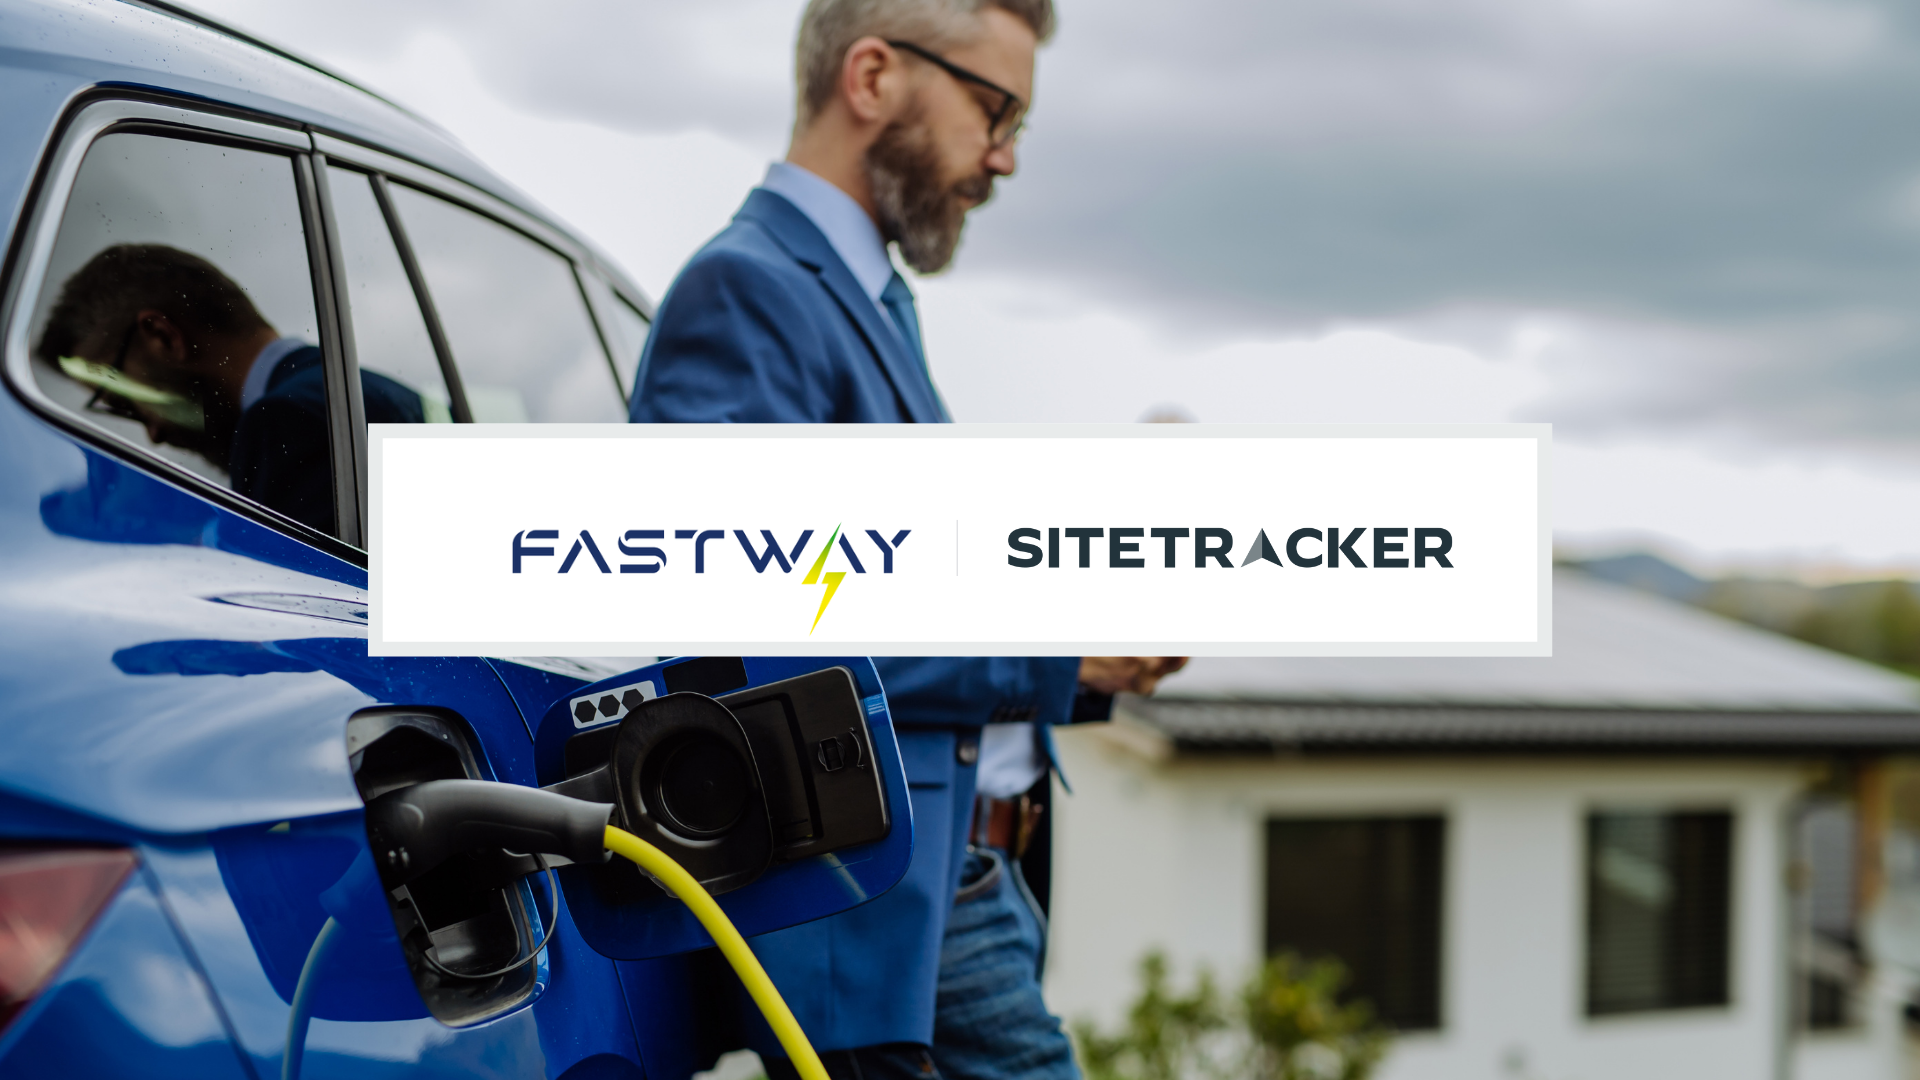 Italy Zooms Ahead with 15,000 EV Chargers - Powered by Sitetracker